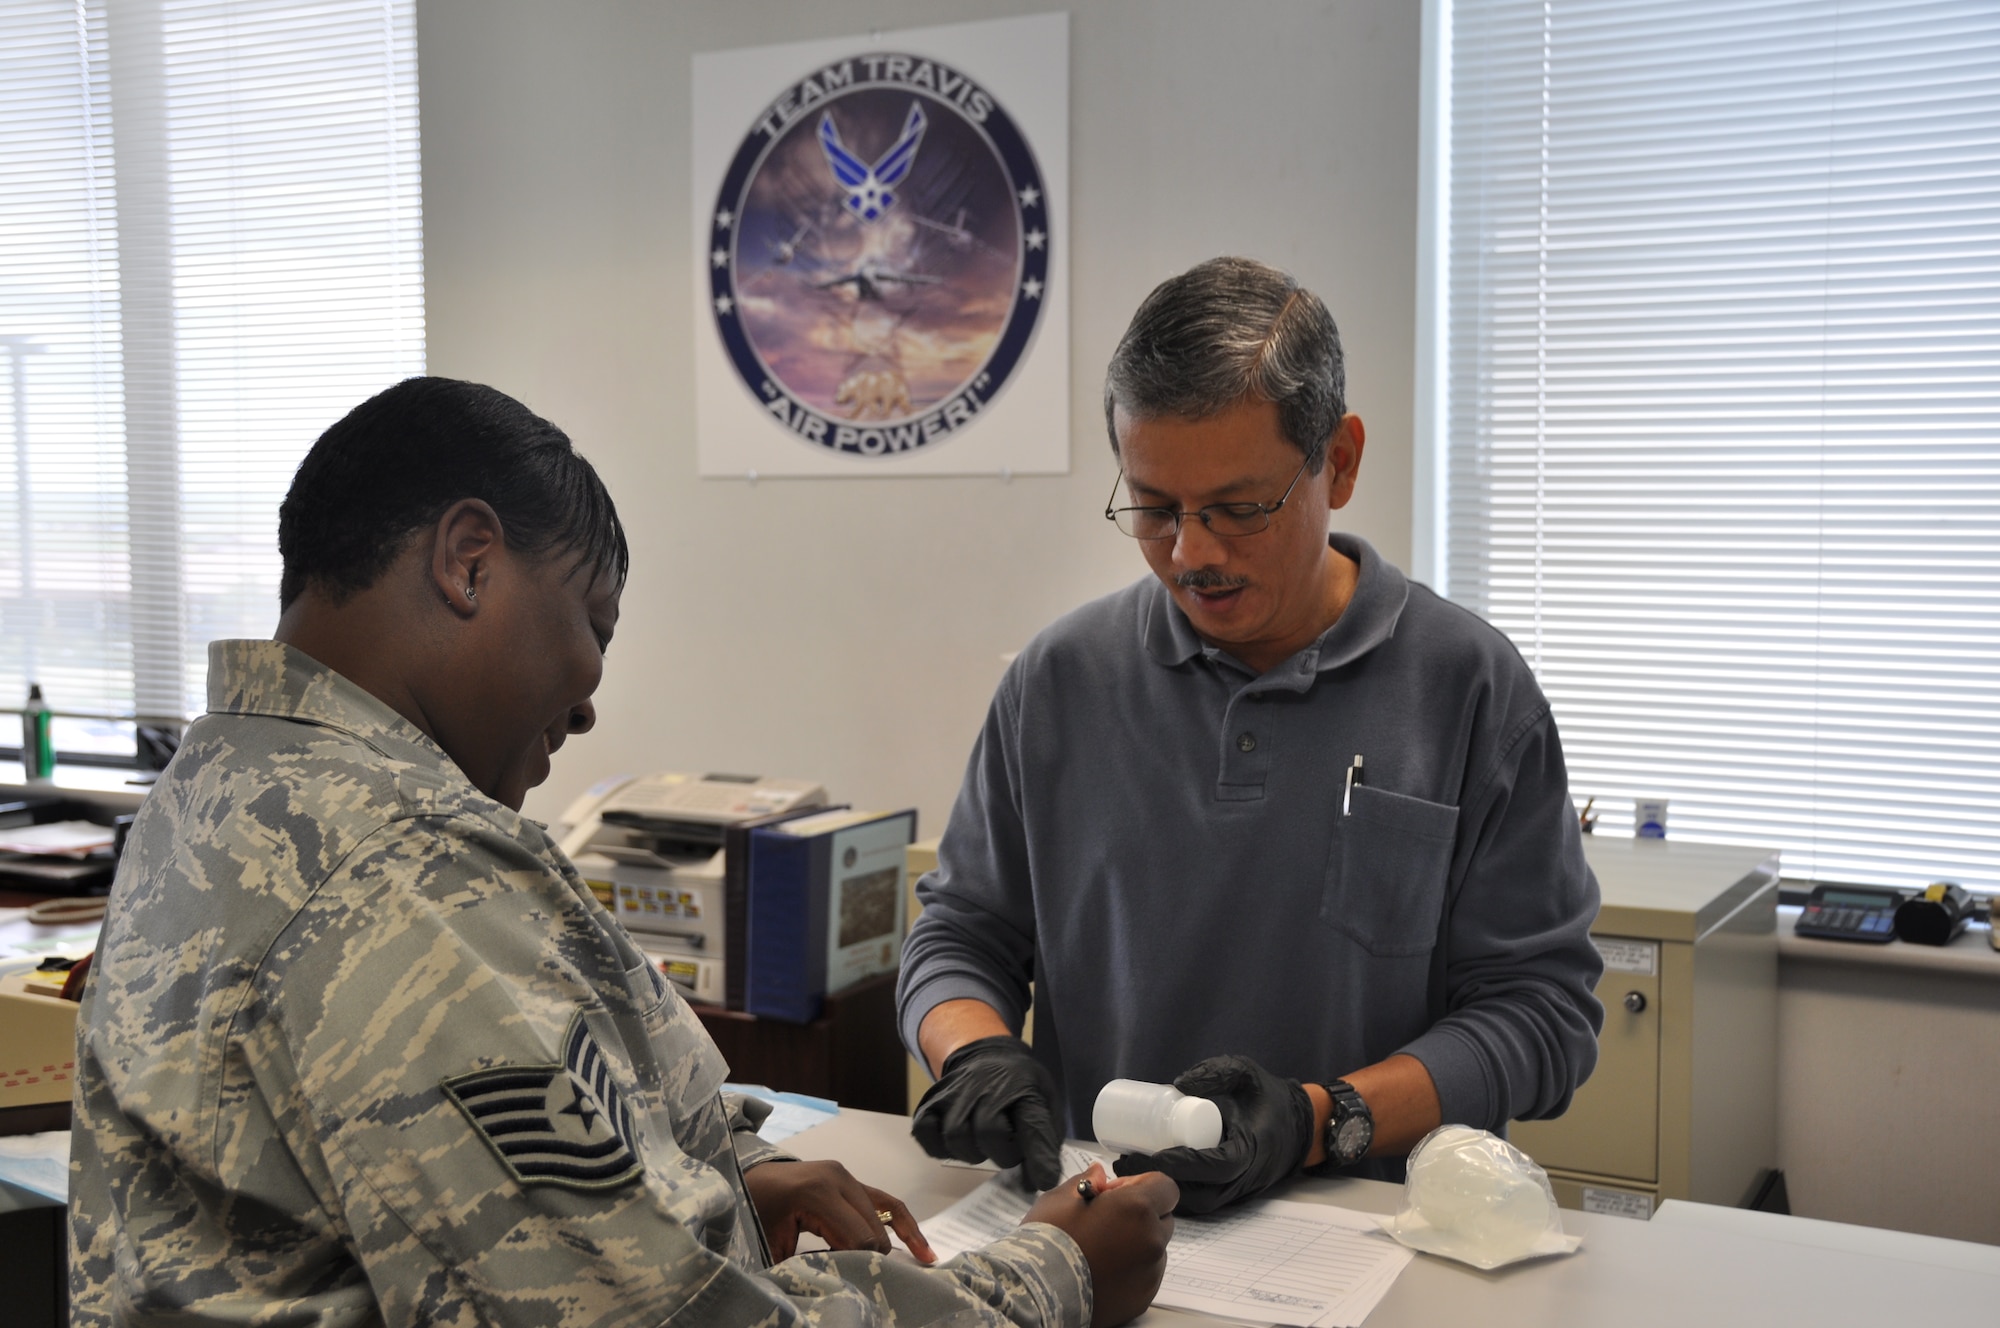 Drug test Administer meets new people daily > Travis Air Force Base